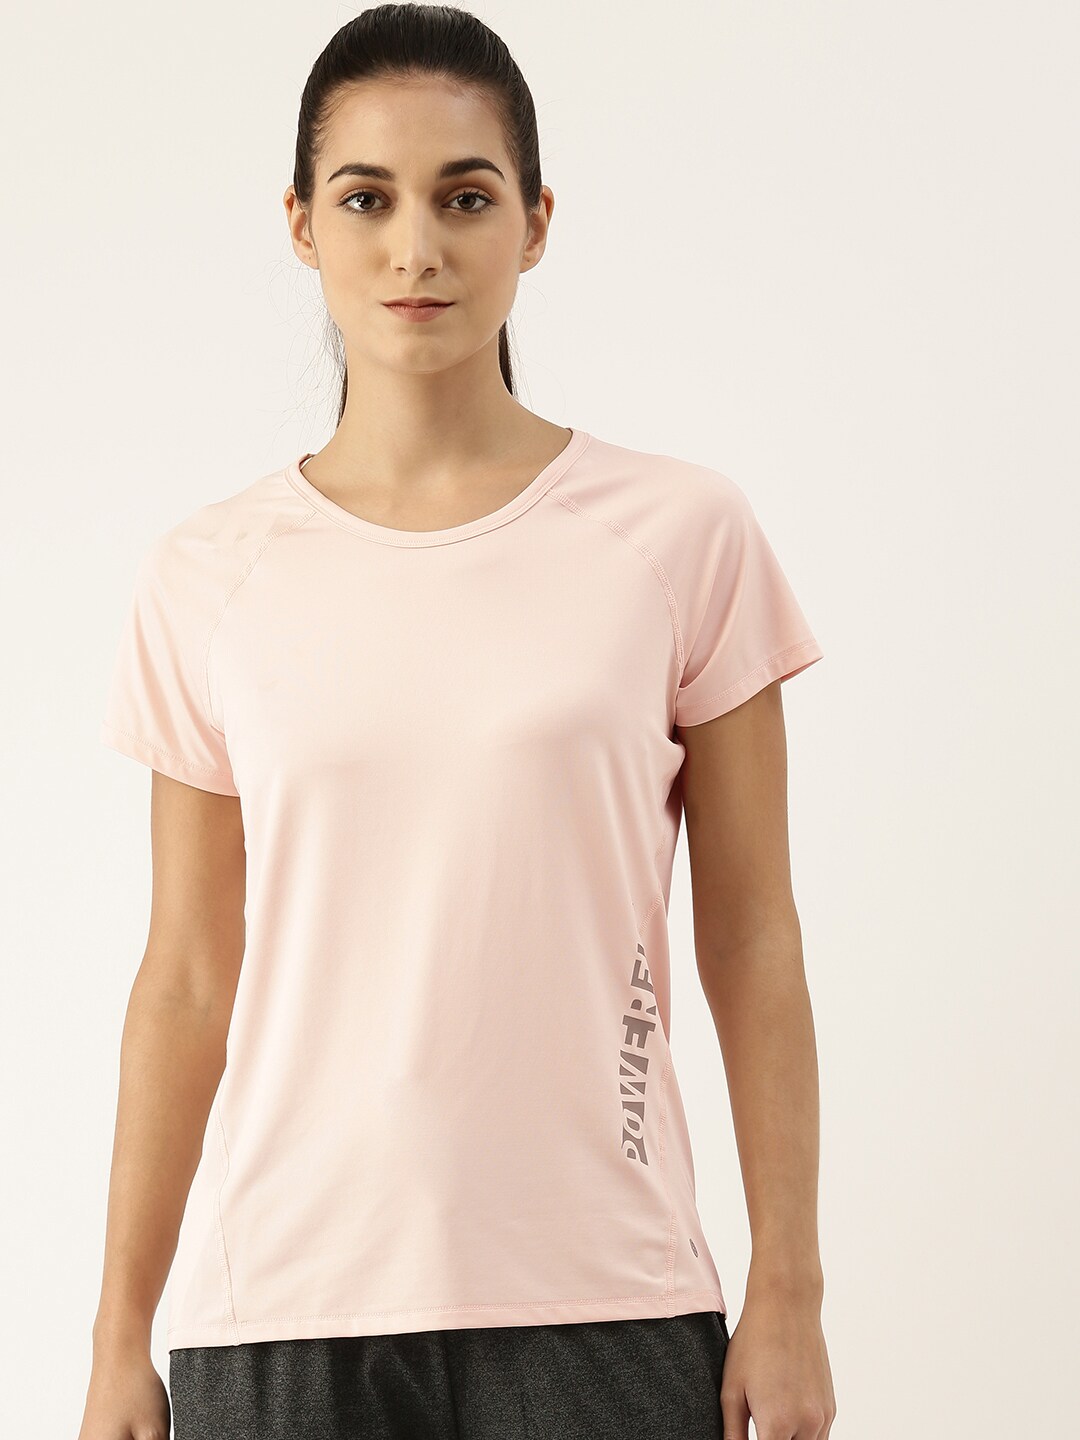 Enamor Women Pink Printed Antimicrobial Outdoor T-shirt Price in India